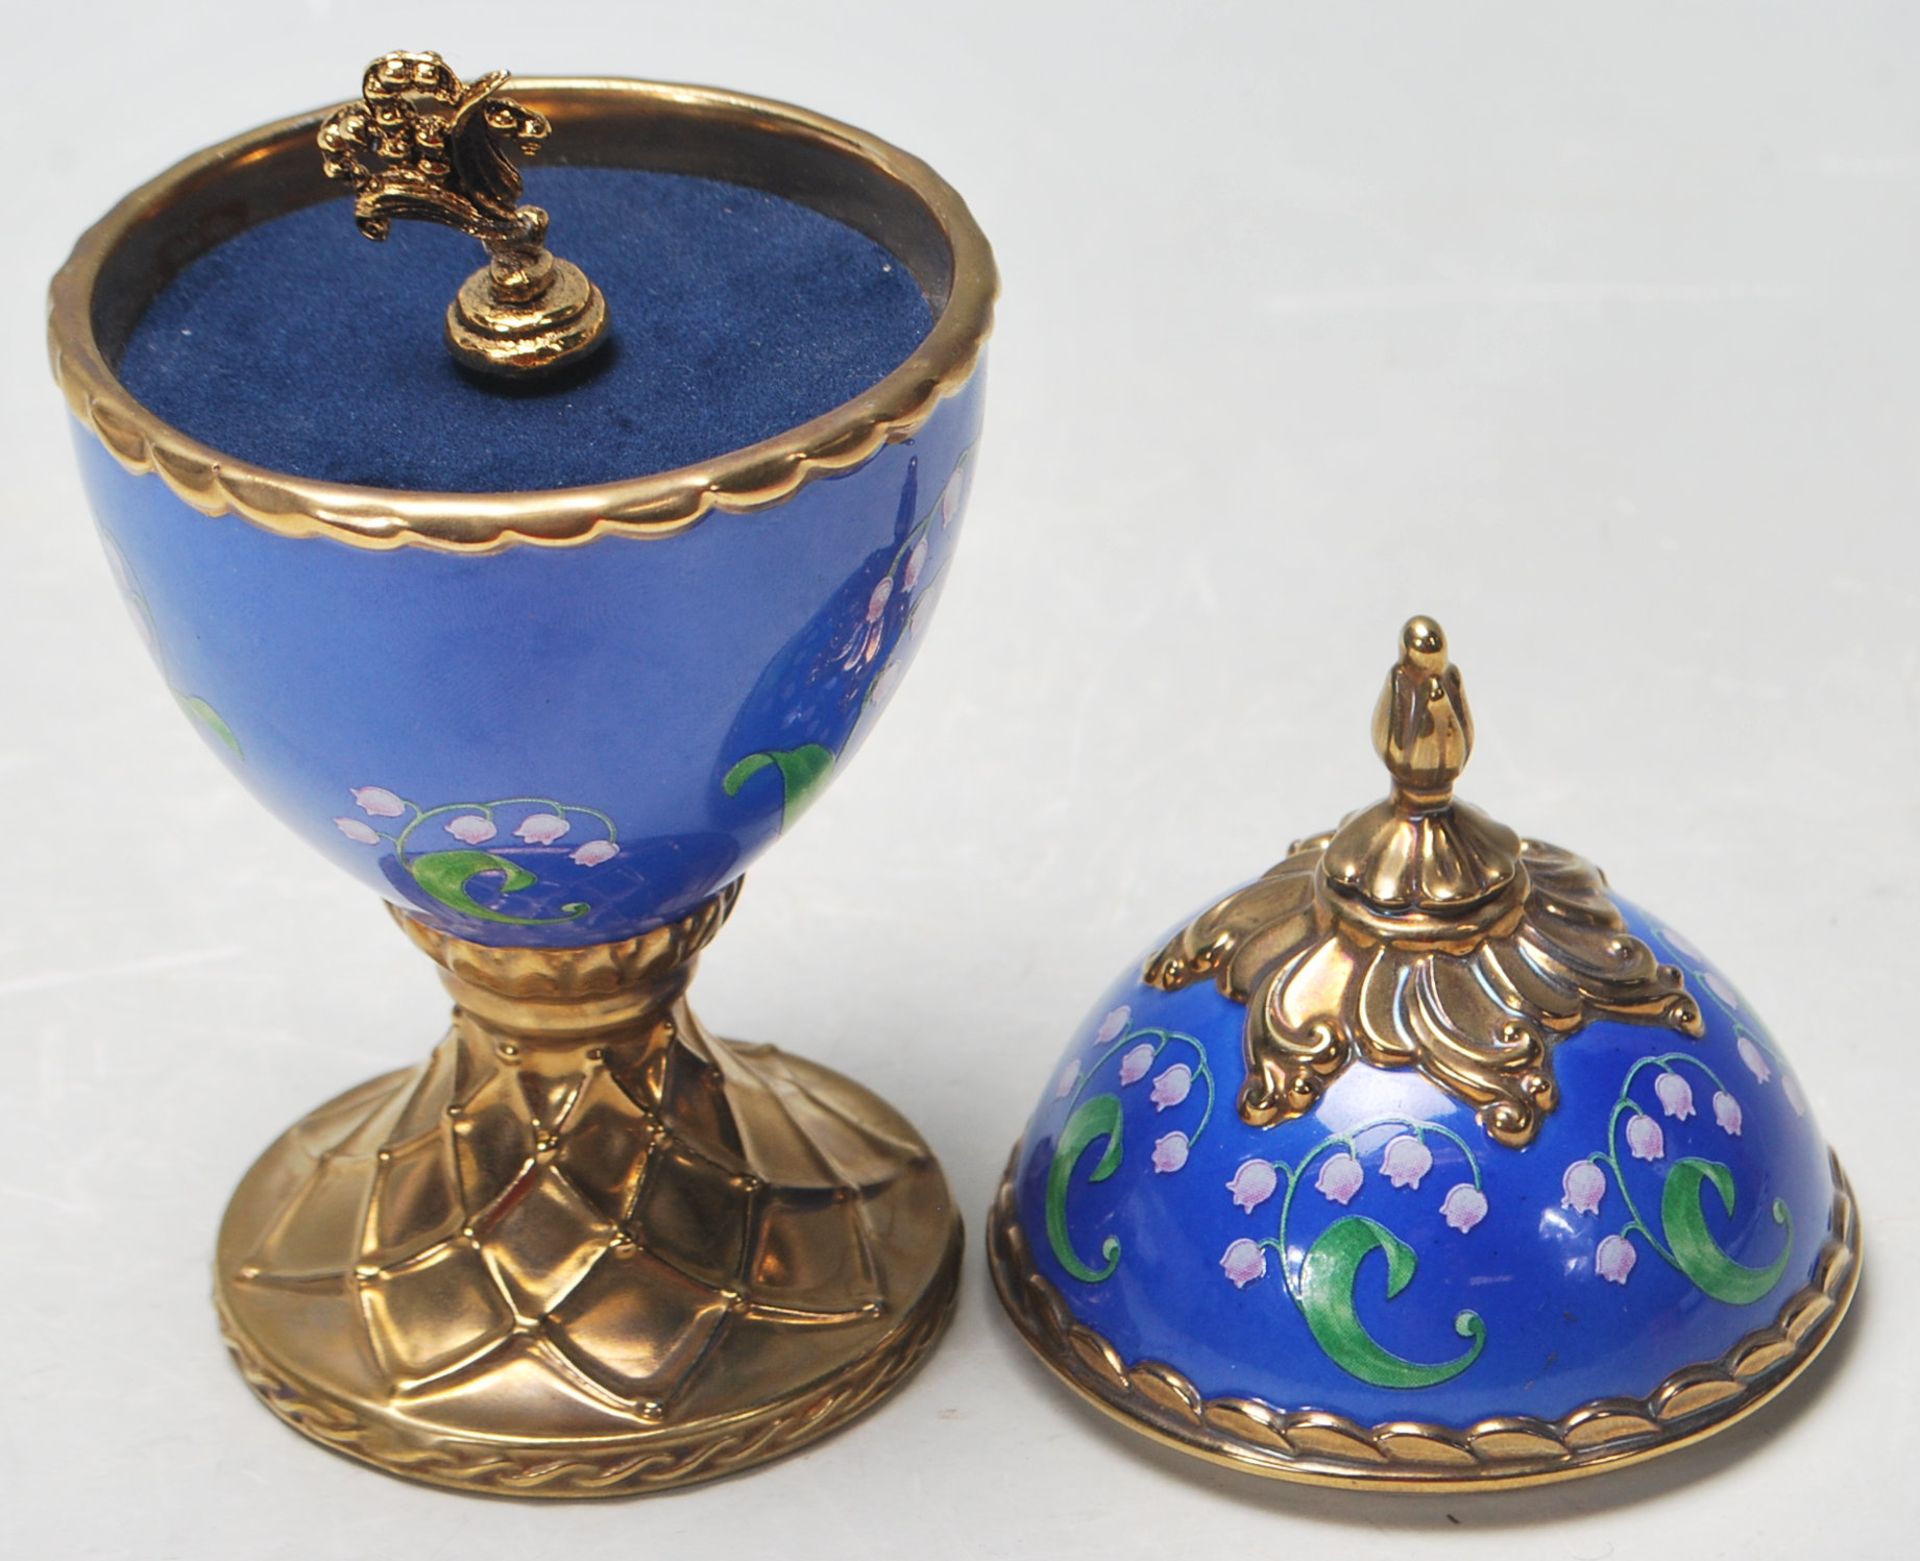 FABERGE EGG - HOUSE OF FABERGE - MUSICAL EGG - LILY OF THE VALLEY - TCHIAKOVSKY’S DANCE OF THE SUGAR